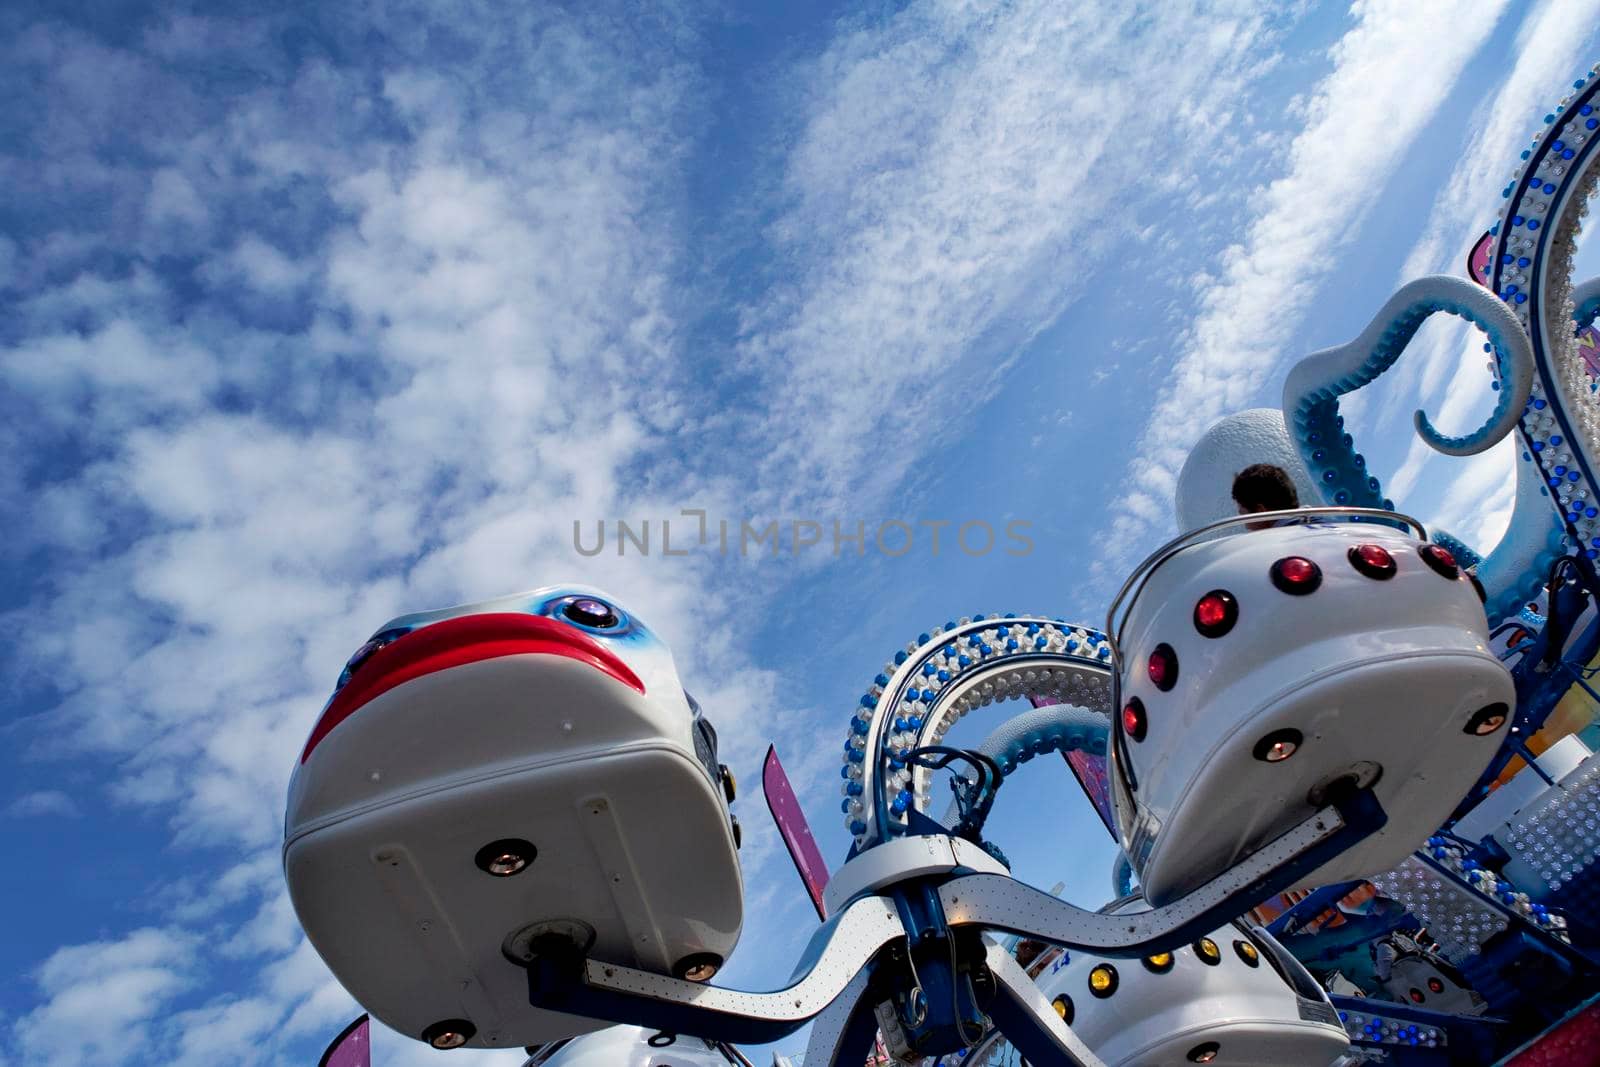 Ride and blue sky at a fairground